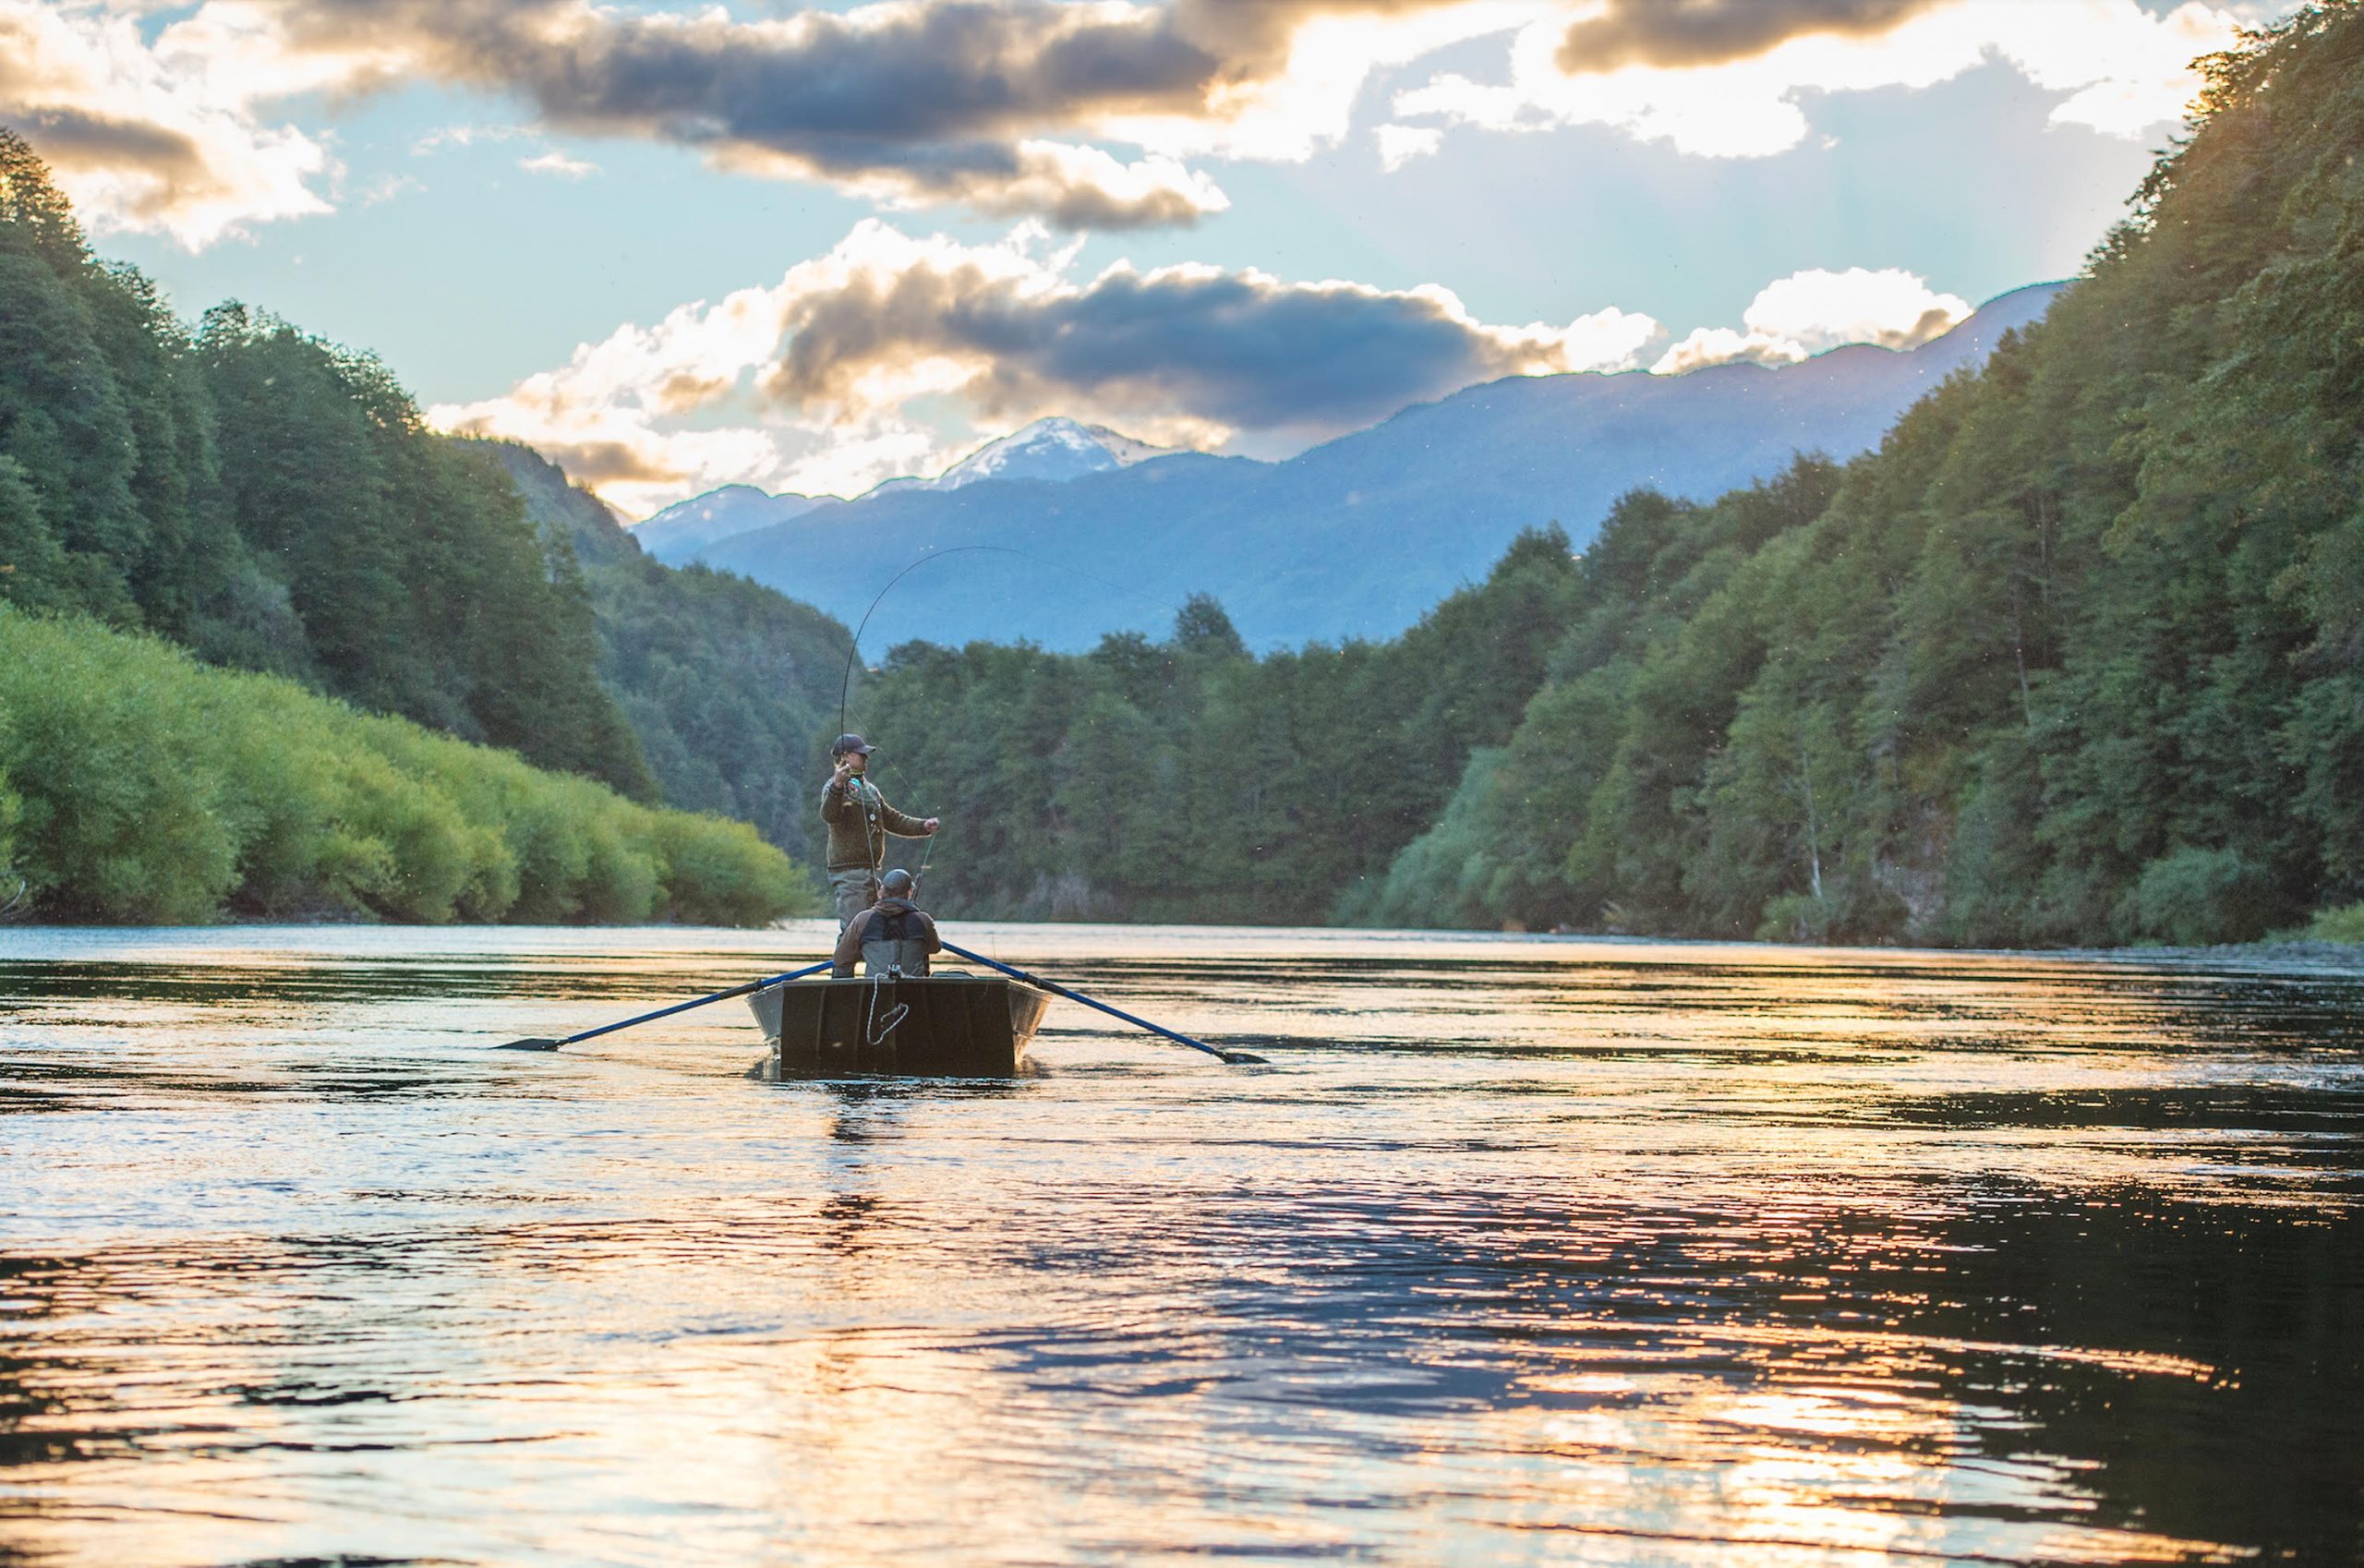 Two anglers on a Patagonia River near Los Lagos, Chile and Eleven Experience's Rio Palena Lodge